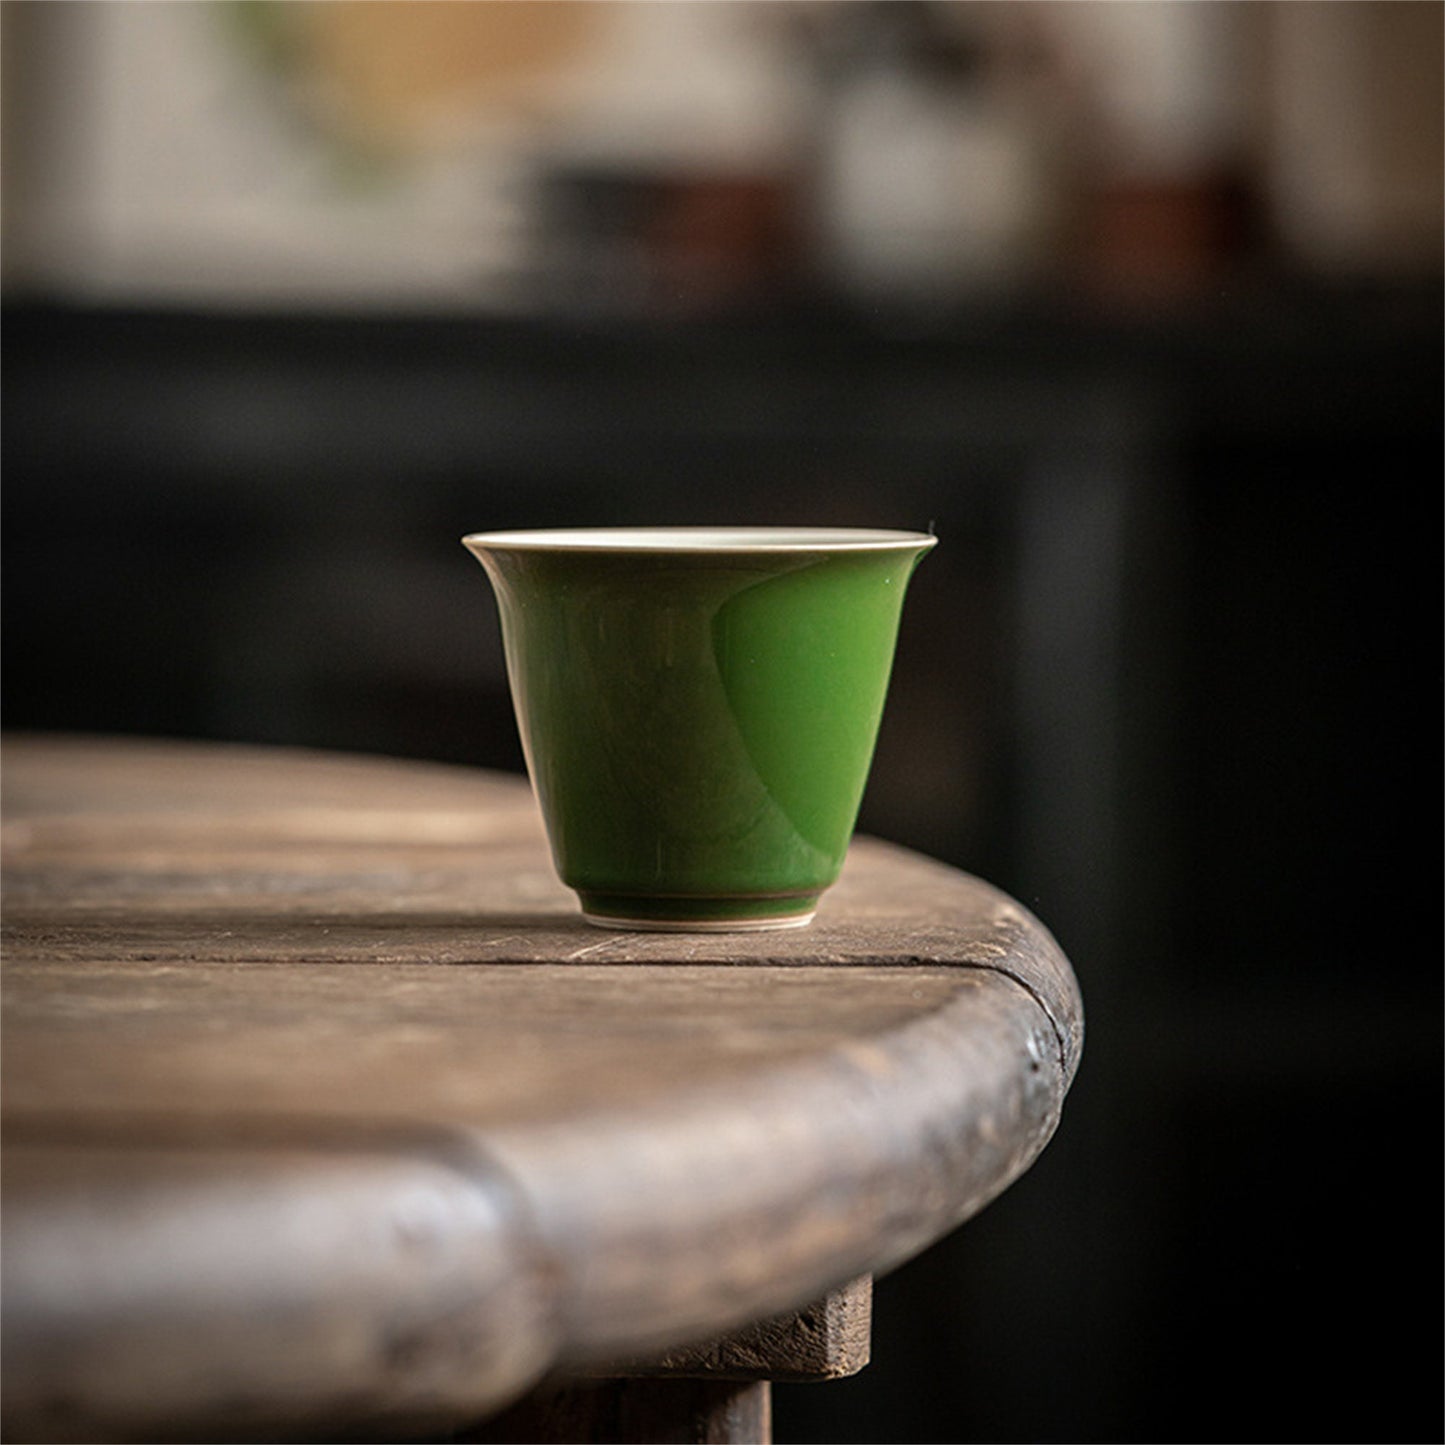 Green Ceramic Teacup Chinese Kung Fu Cup 40ml